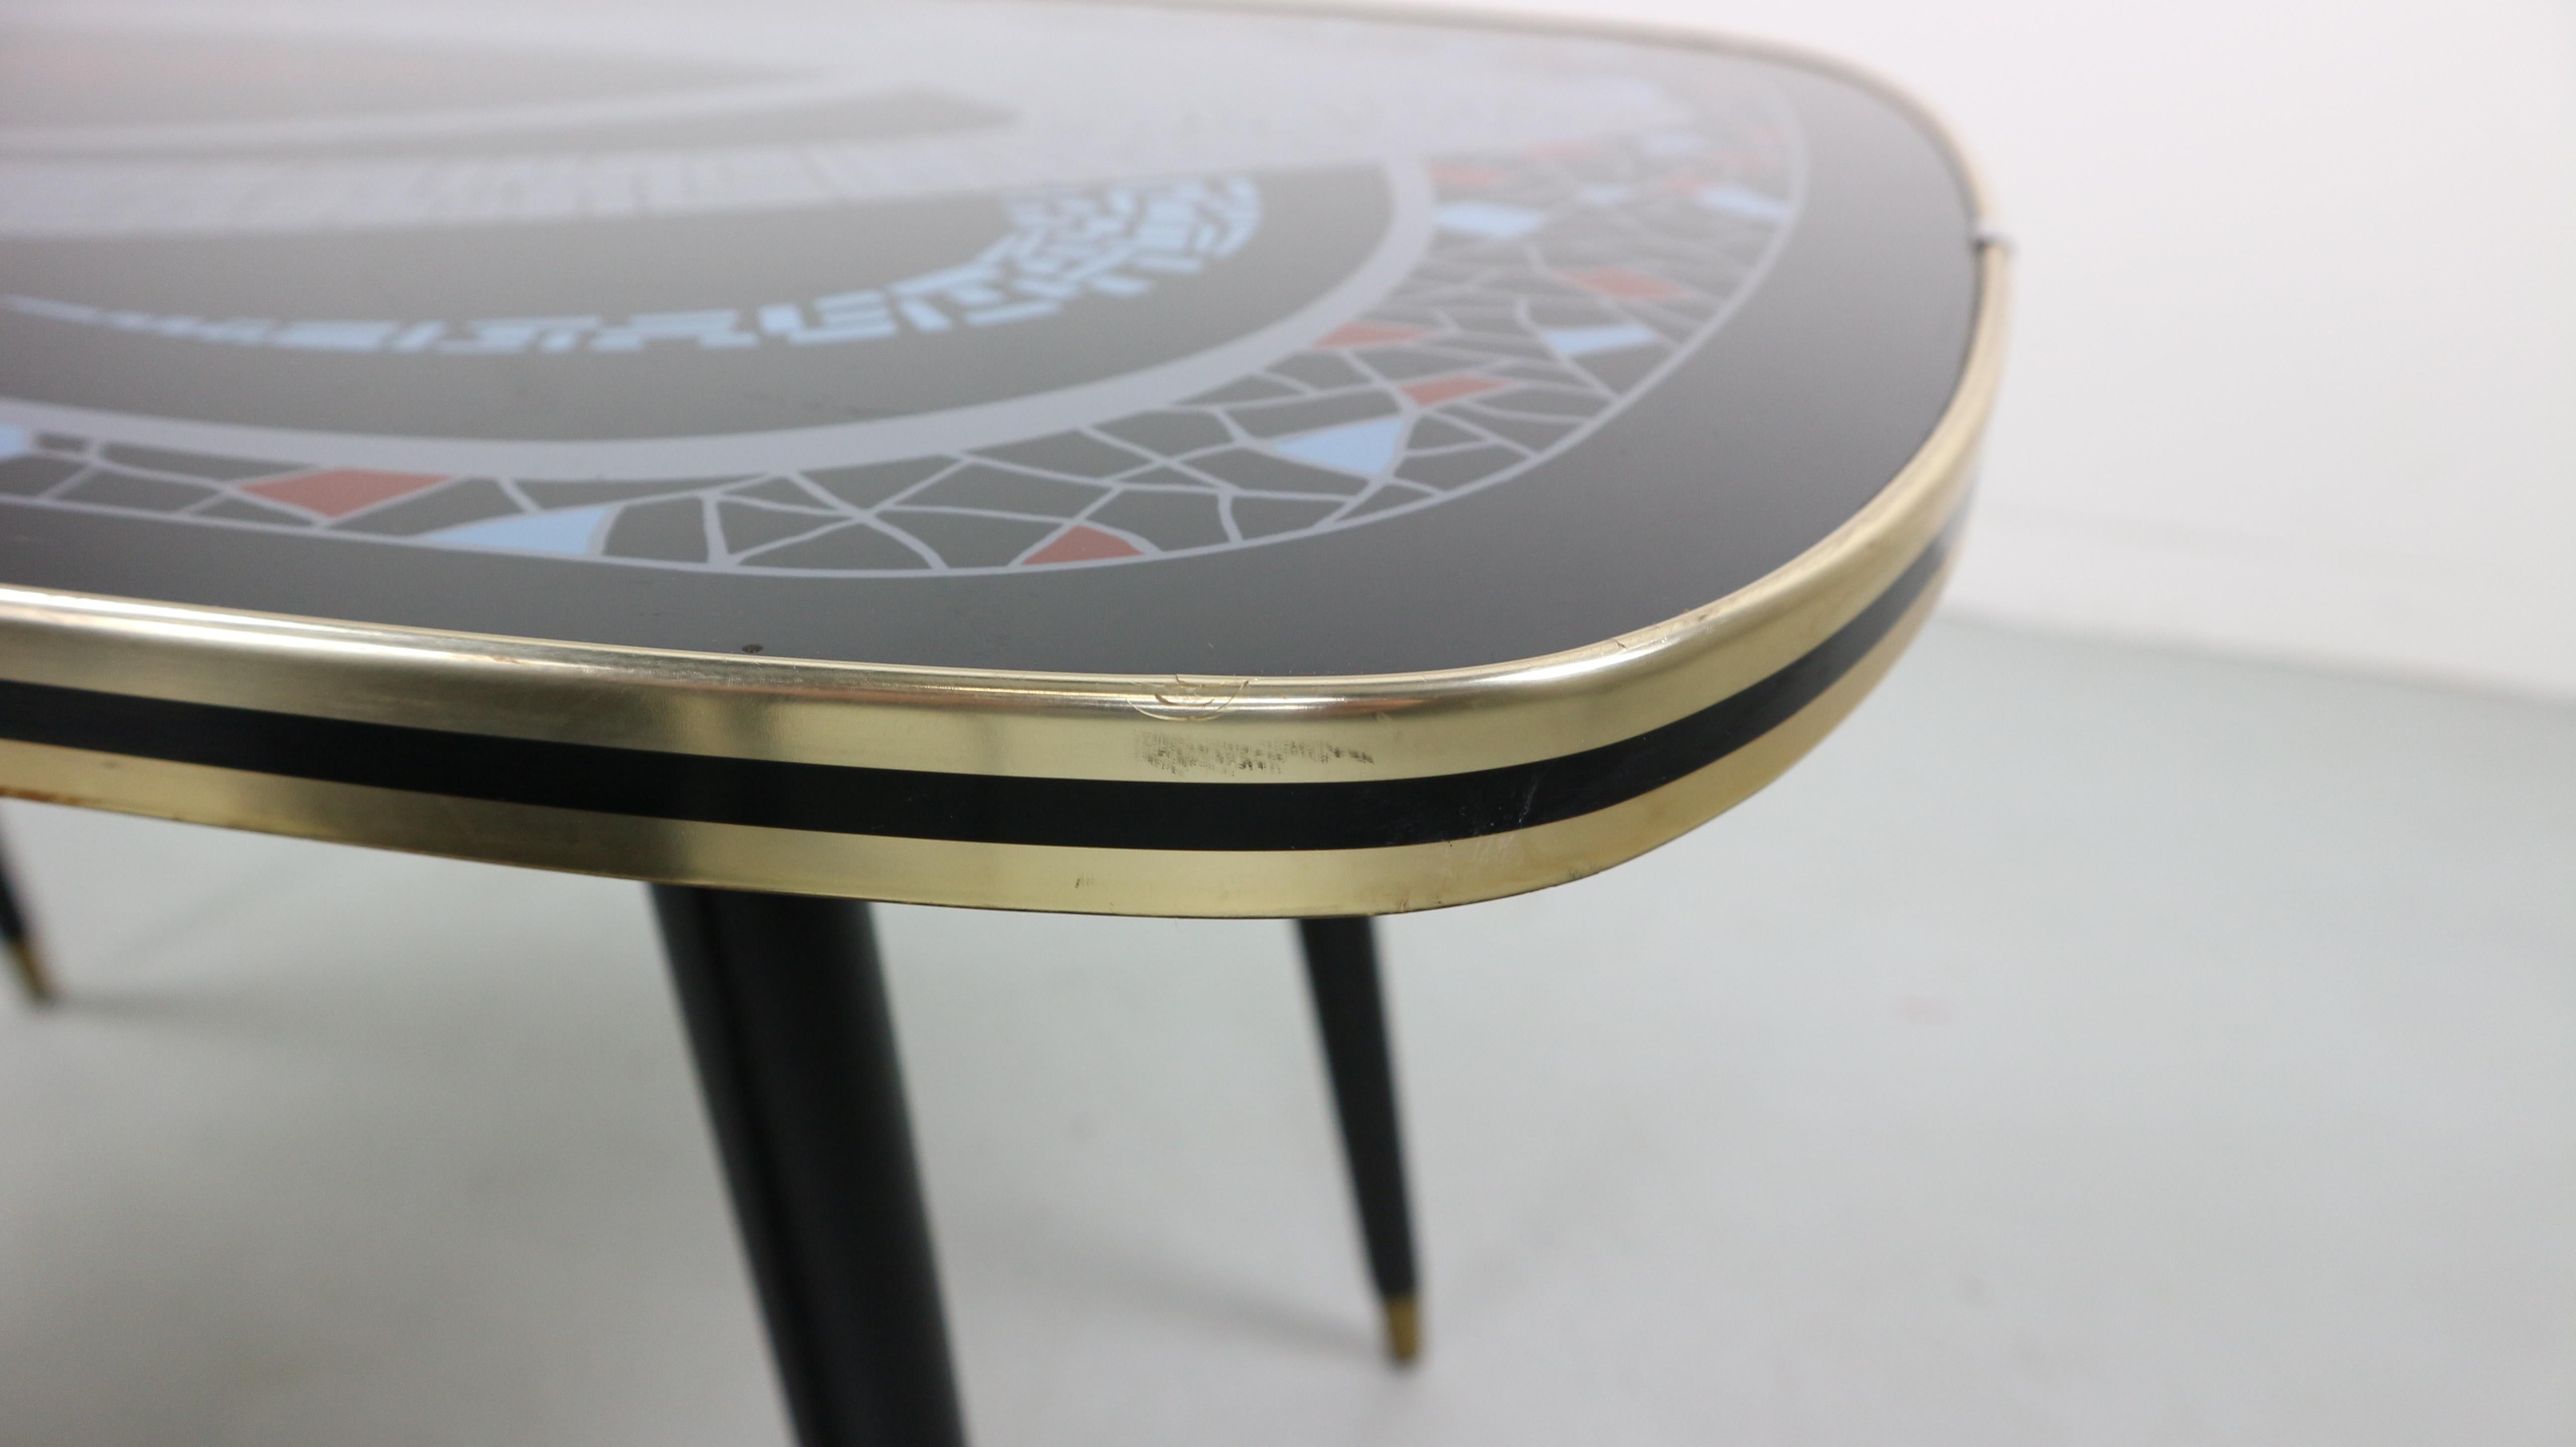 Cocktail Table 1950s Atomic Graphic Design Tabletop and Brass Feet 1